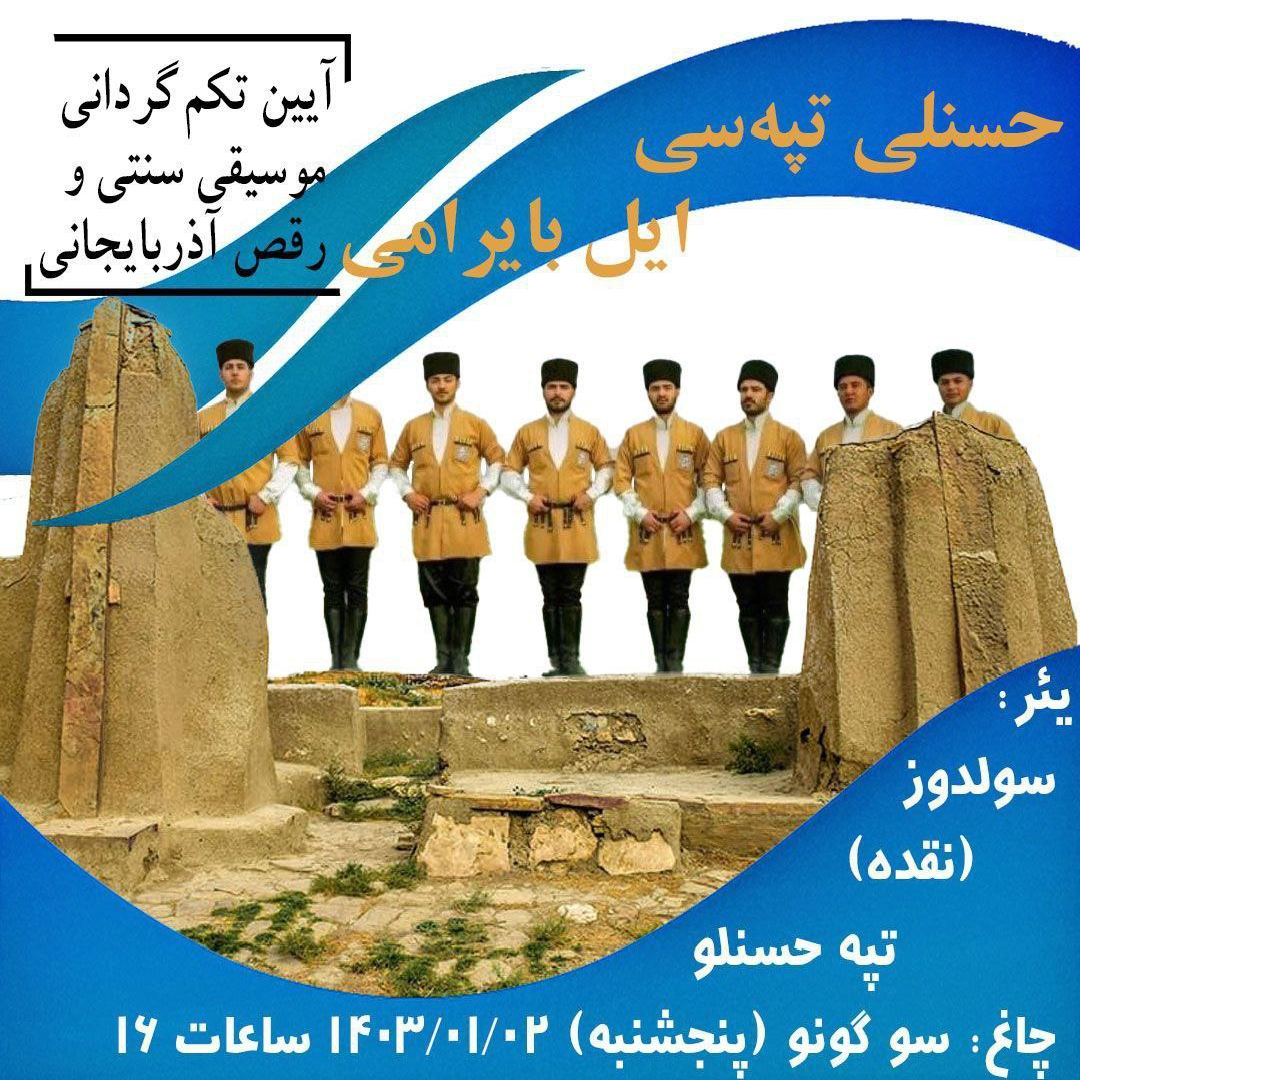 A holiday event was held at the famous archaeological site of South Azerbaijan